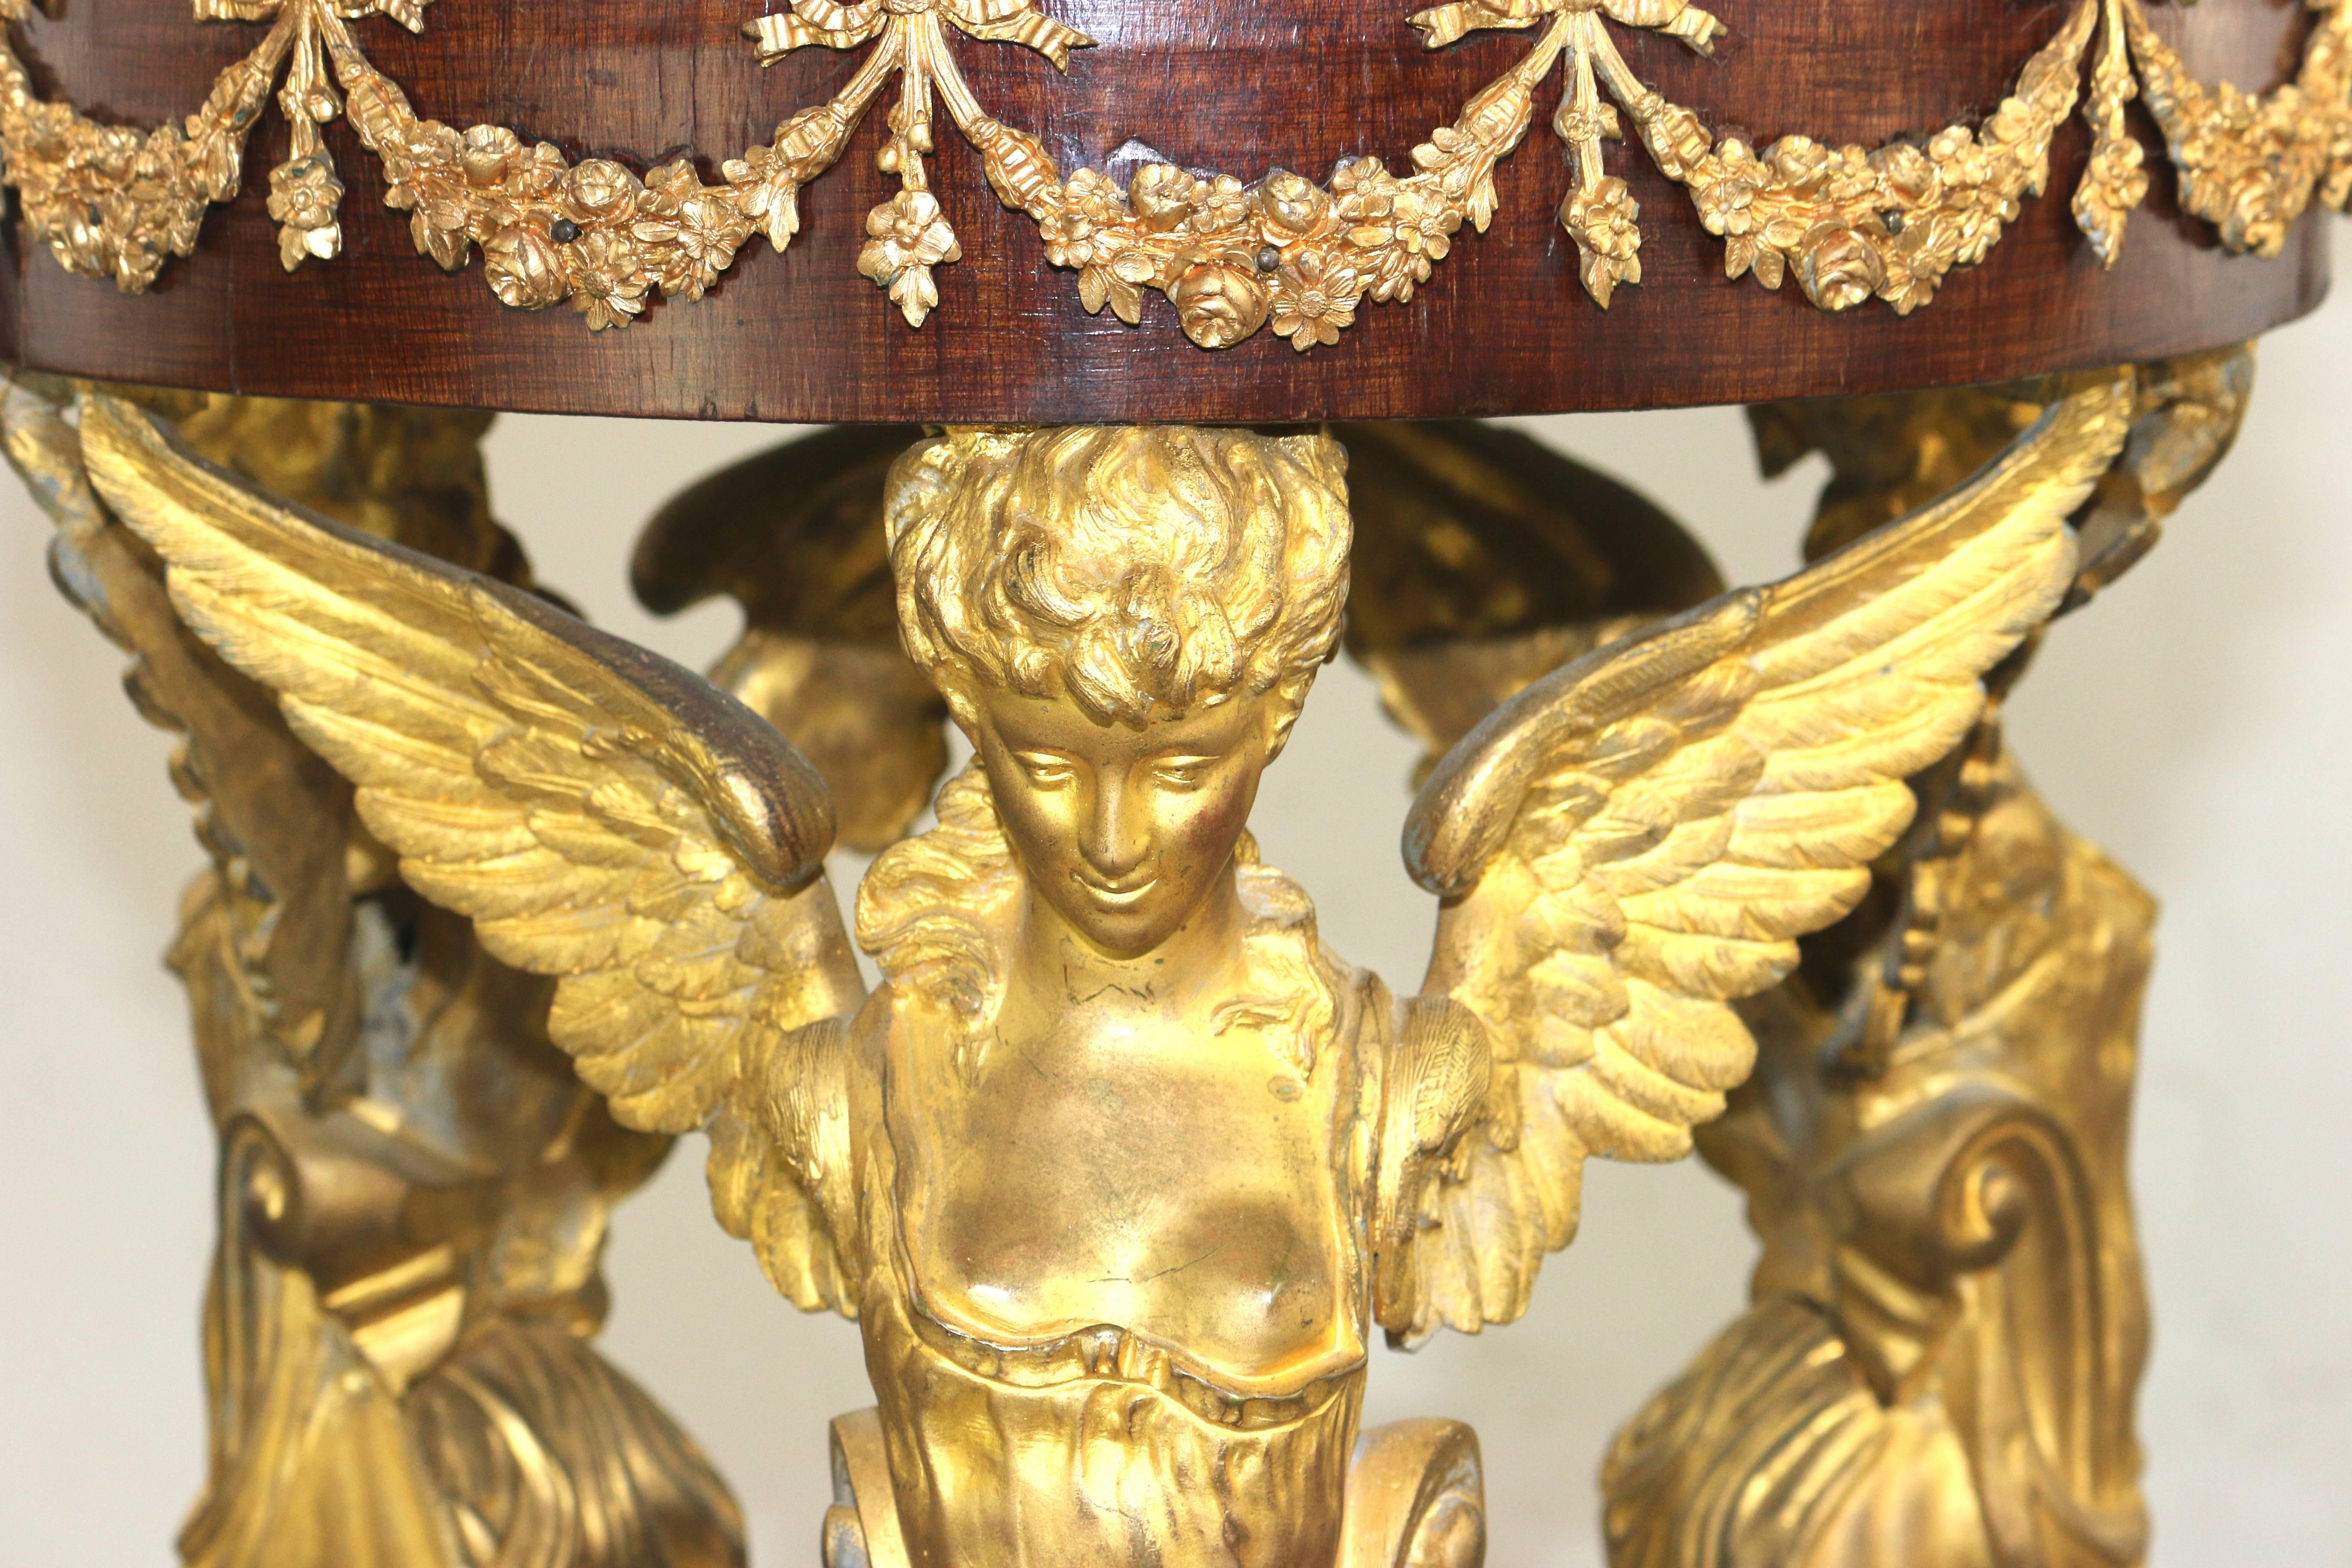 19th Century French Empire Period Gilt Mahogany Pedestal, Gilt Winged Caryatids For Sale